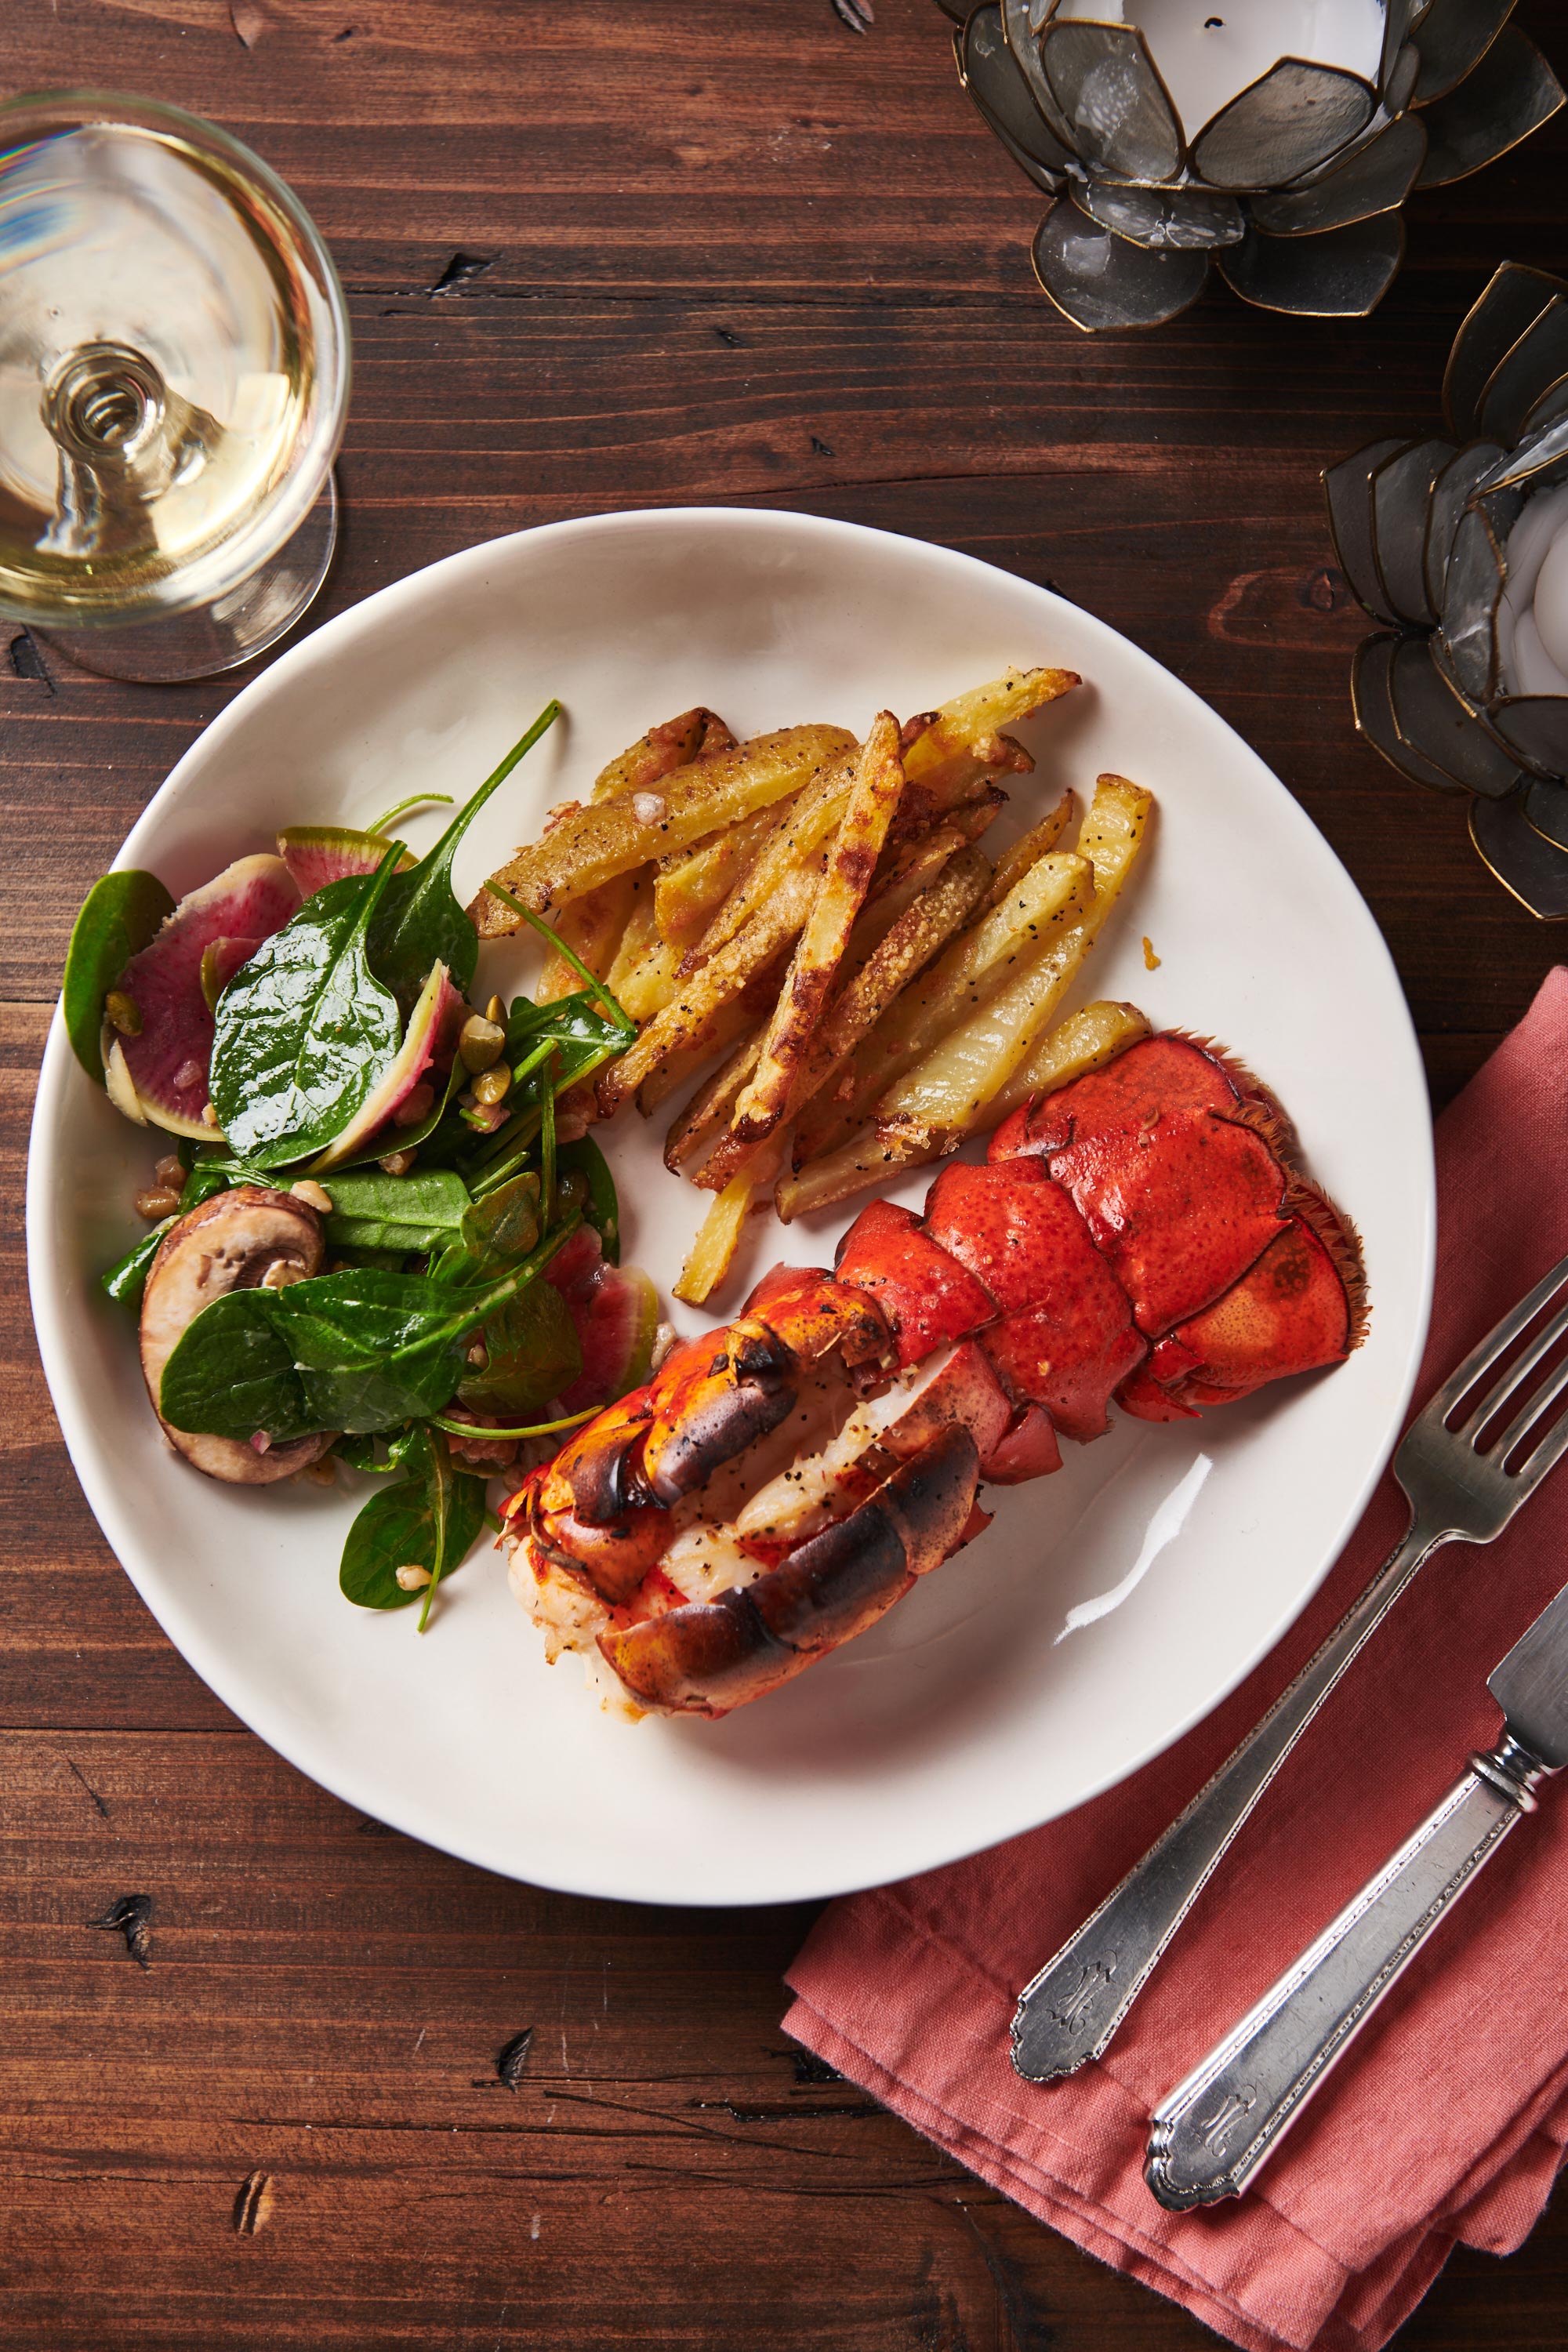 Broiled Lobster Tail with salad and french fries on a plate.